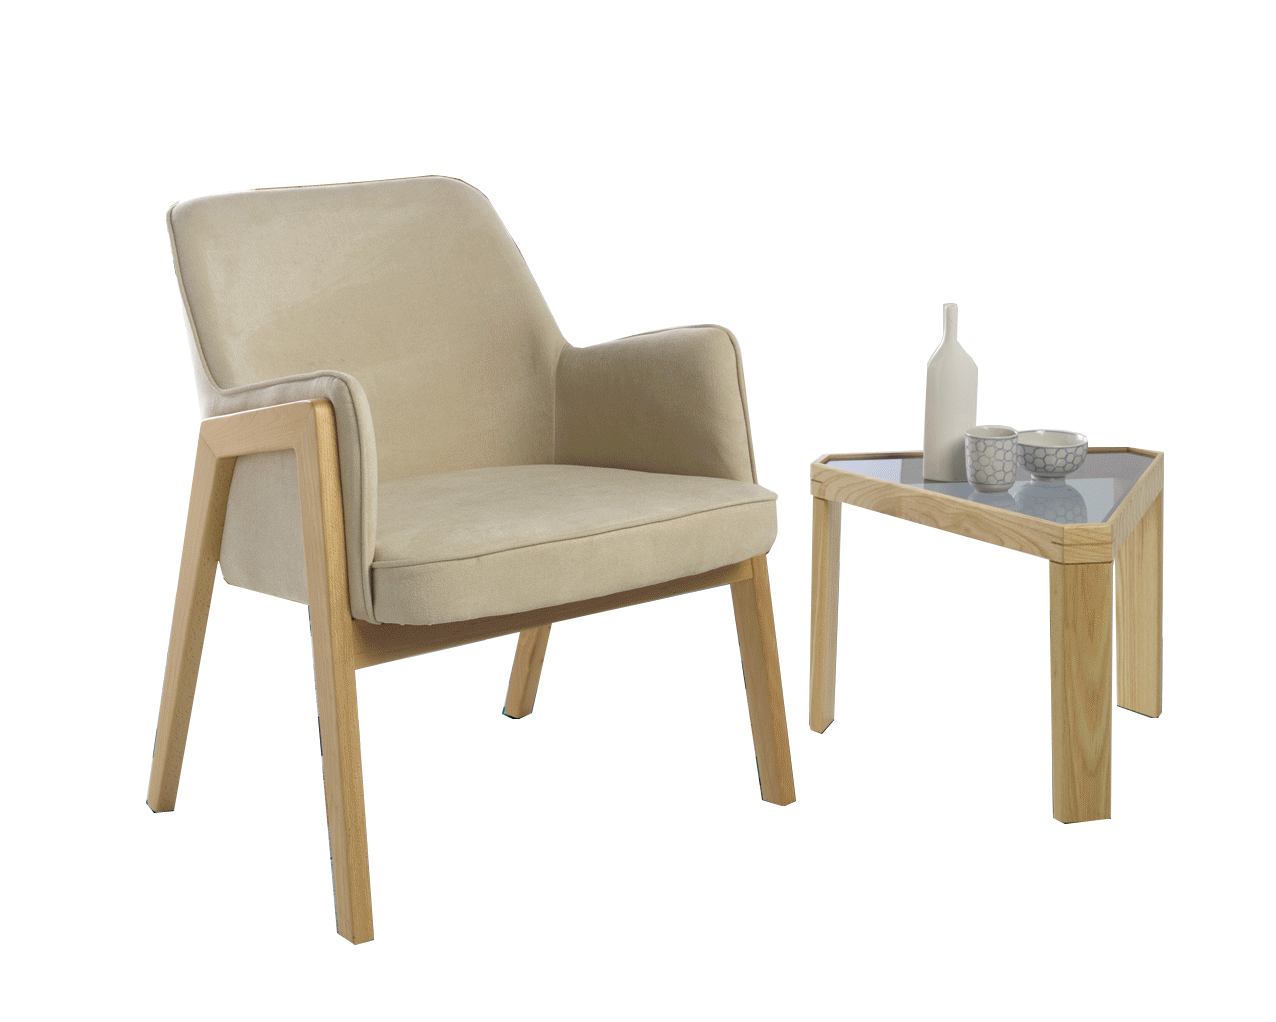 Living Room Furniture Coffee and End Tables DC-1365 Chair, CT-1419